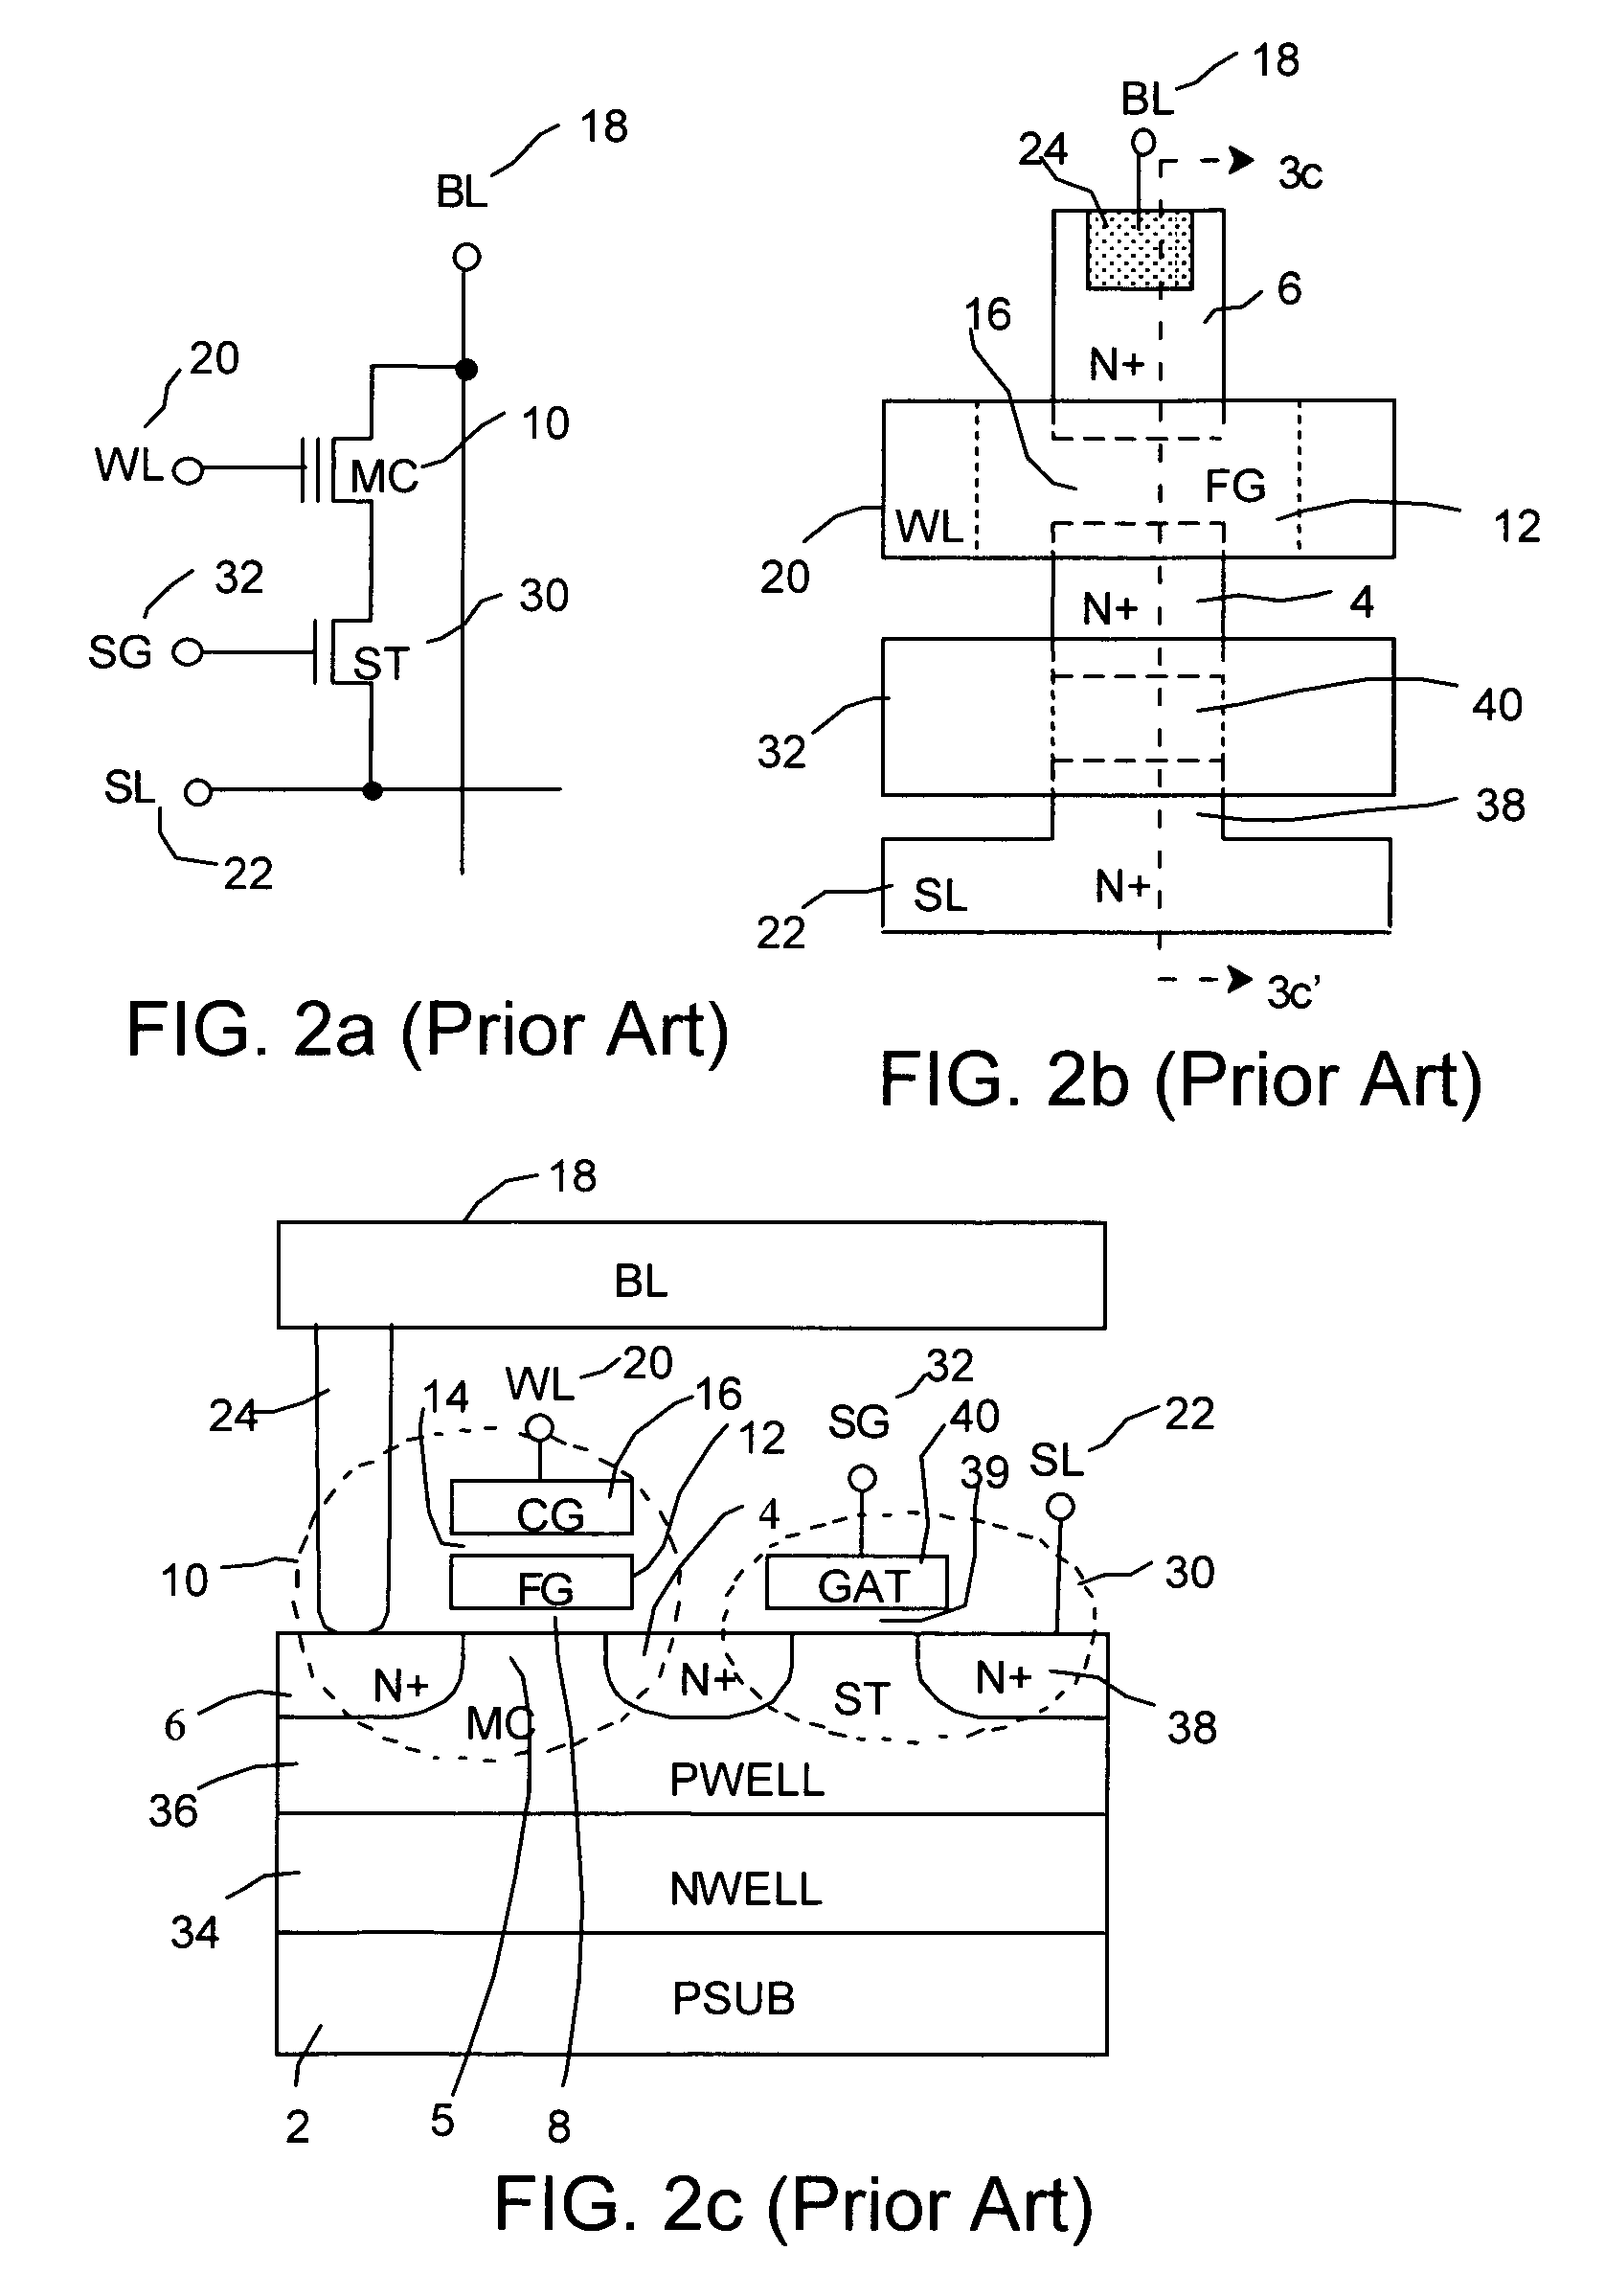 Monolithic, combo nonvolatile memory allowing byte, page and block write with no disturb and divided-well in the cell array using a unified cell structure and technology with a new scheme of decoder and layout